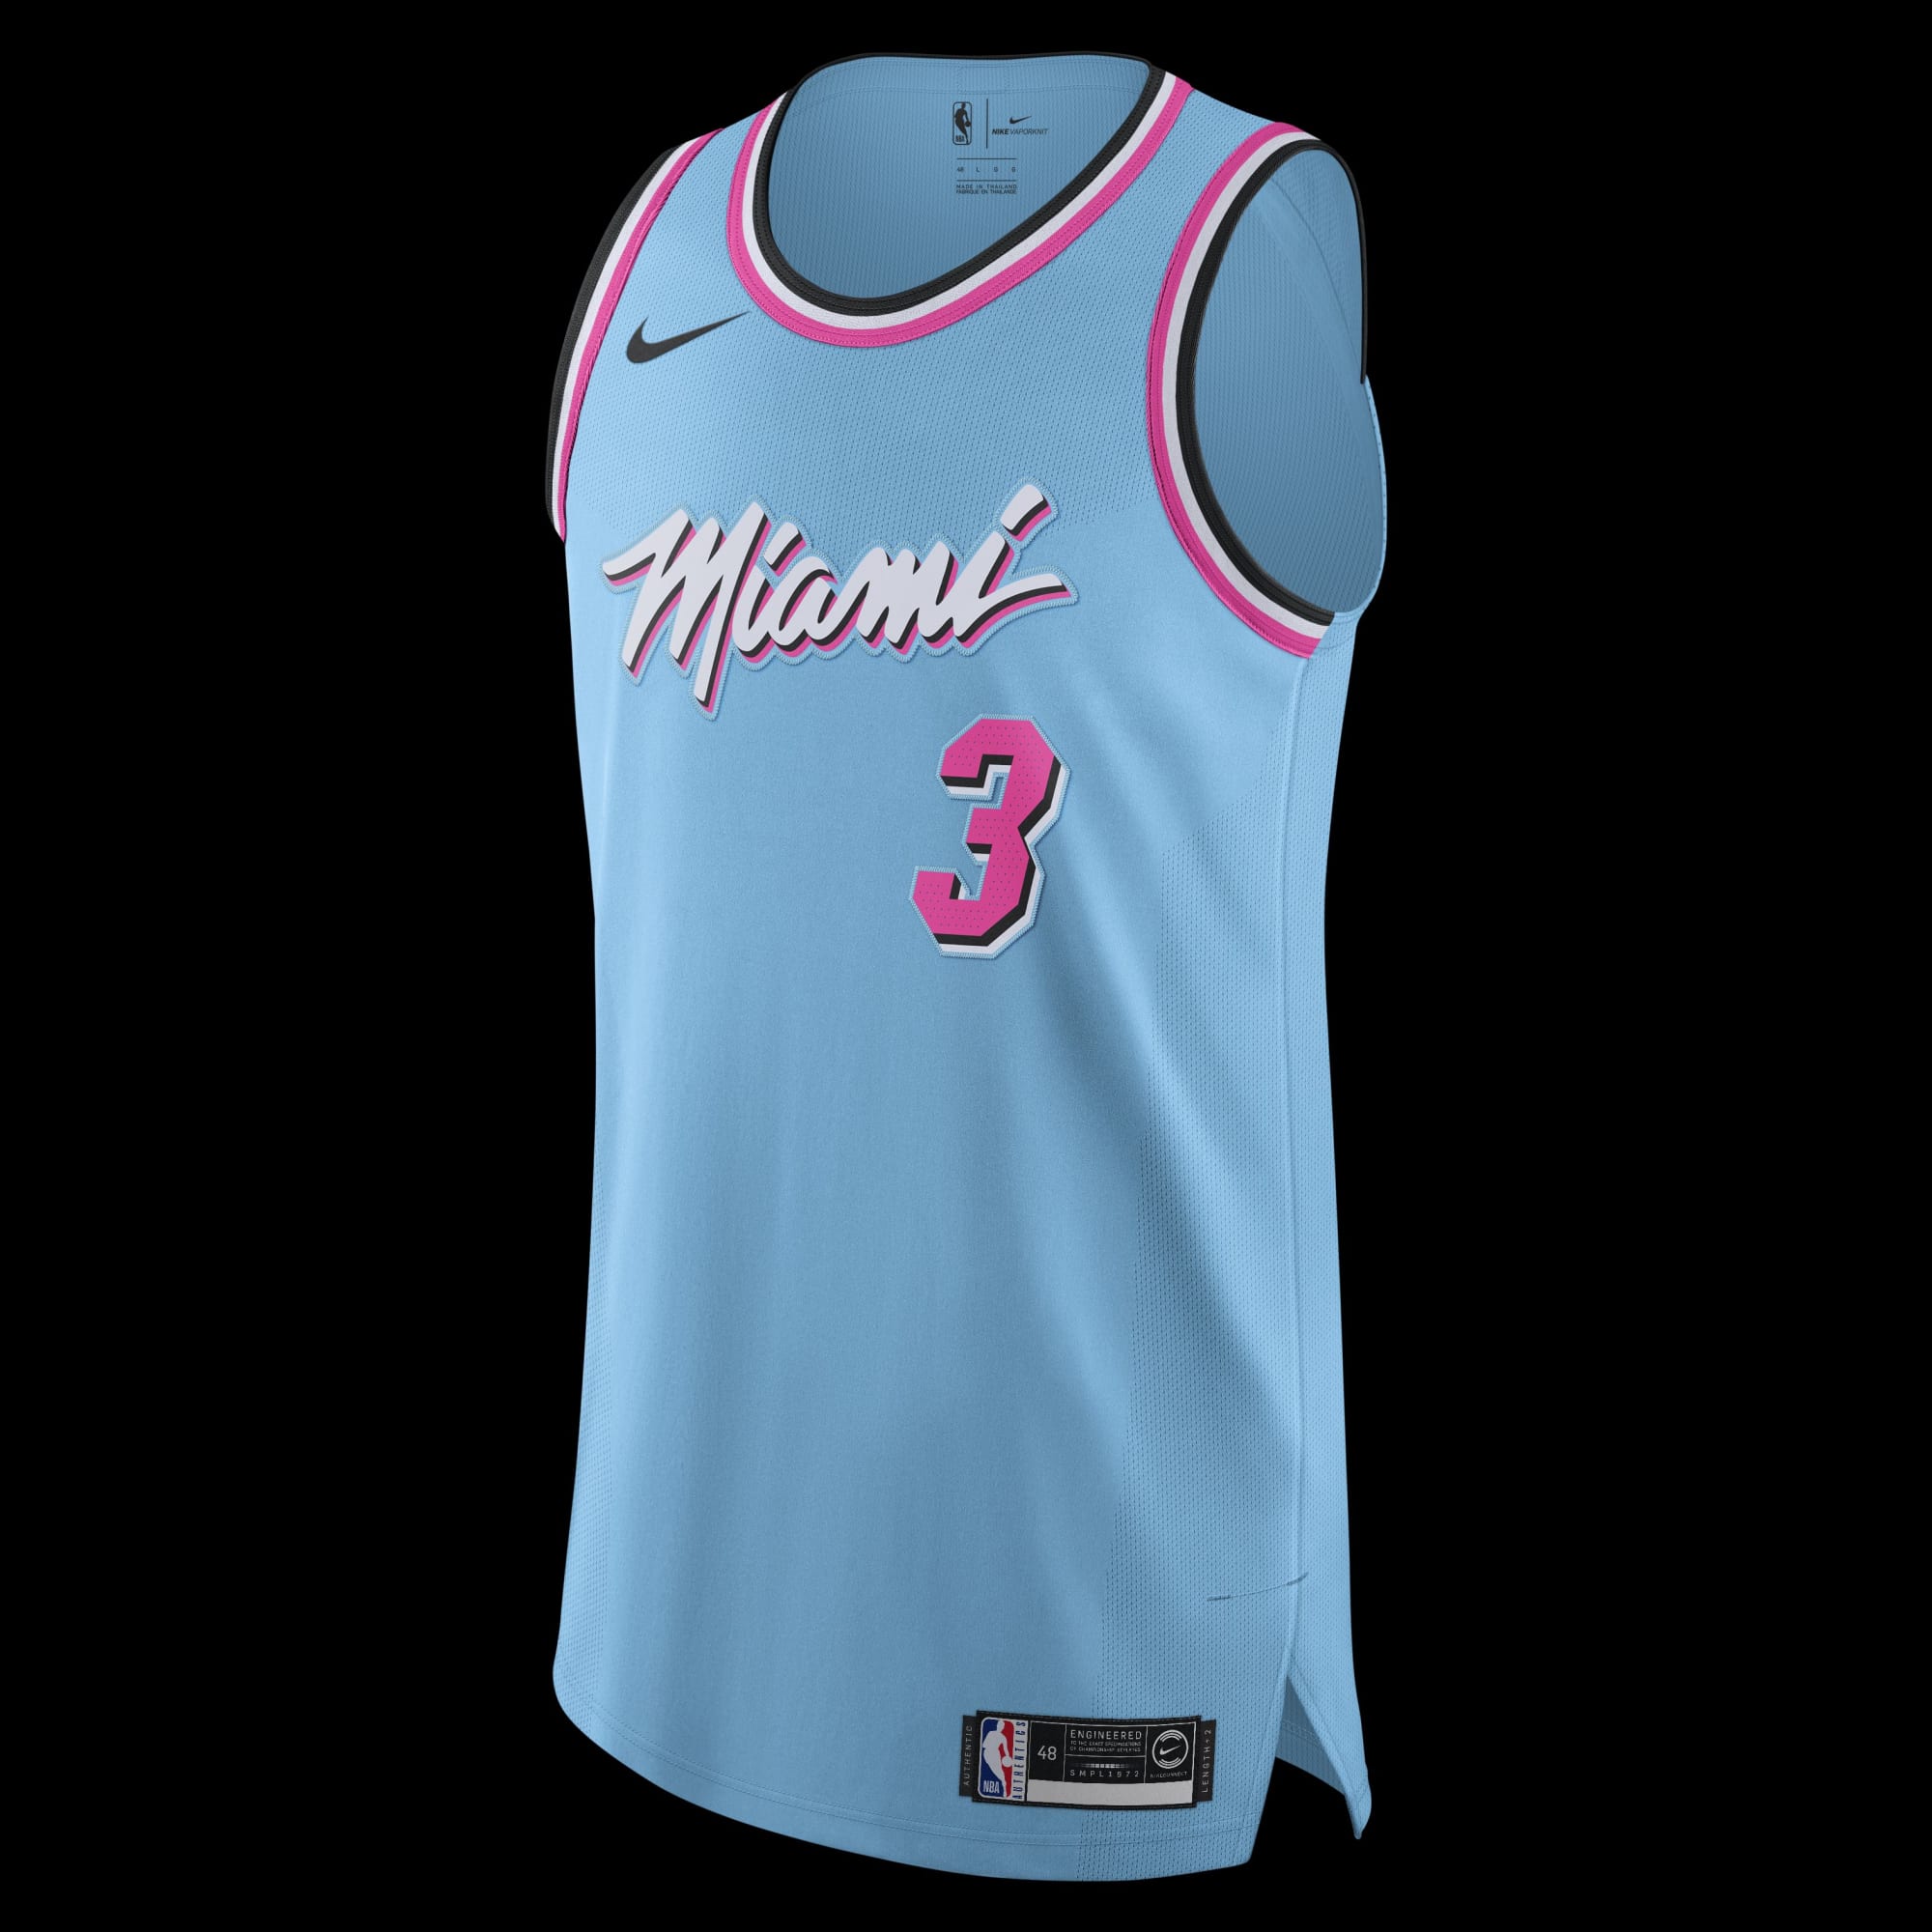 Nike’s line of City Edition jerseys has been awesome from the get-go. 